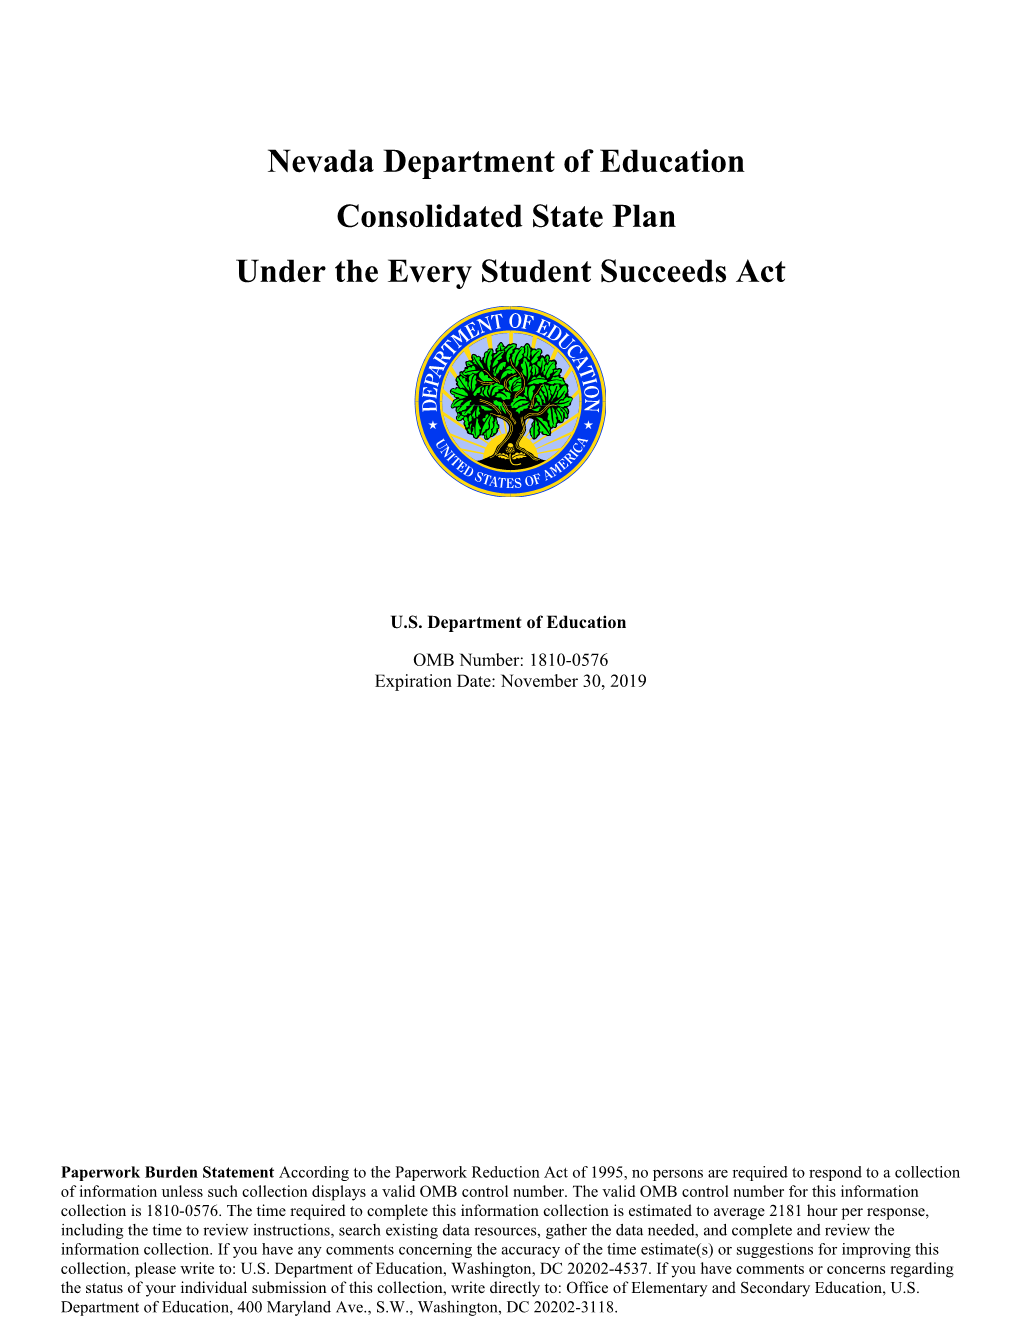 ESSA NV Consolidated State Plan April, 2017 (MS Word)